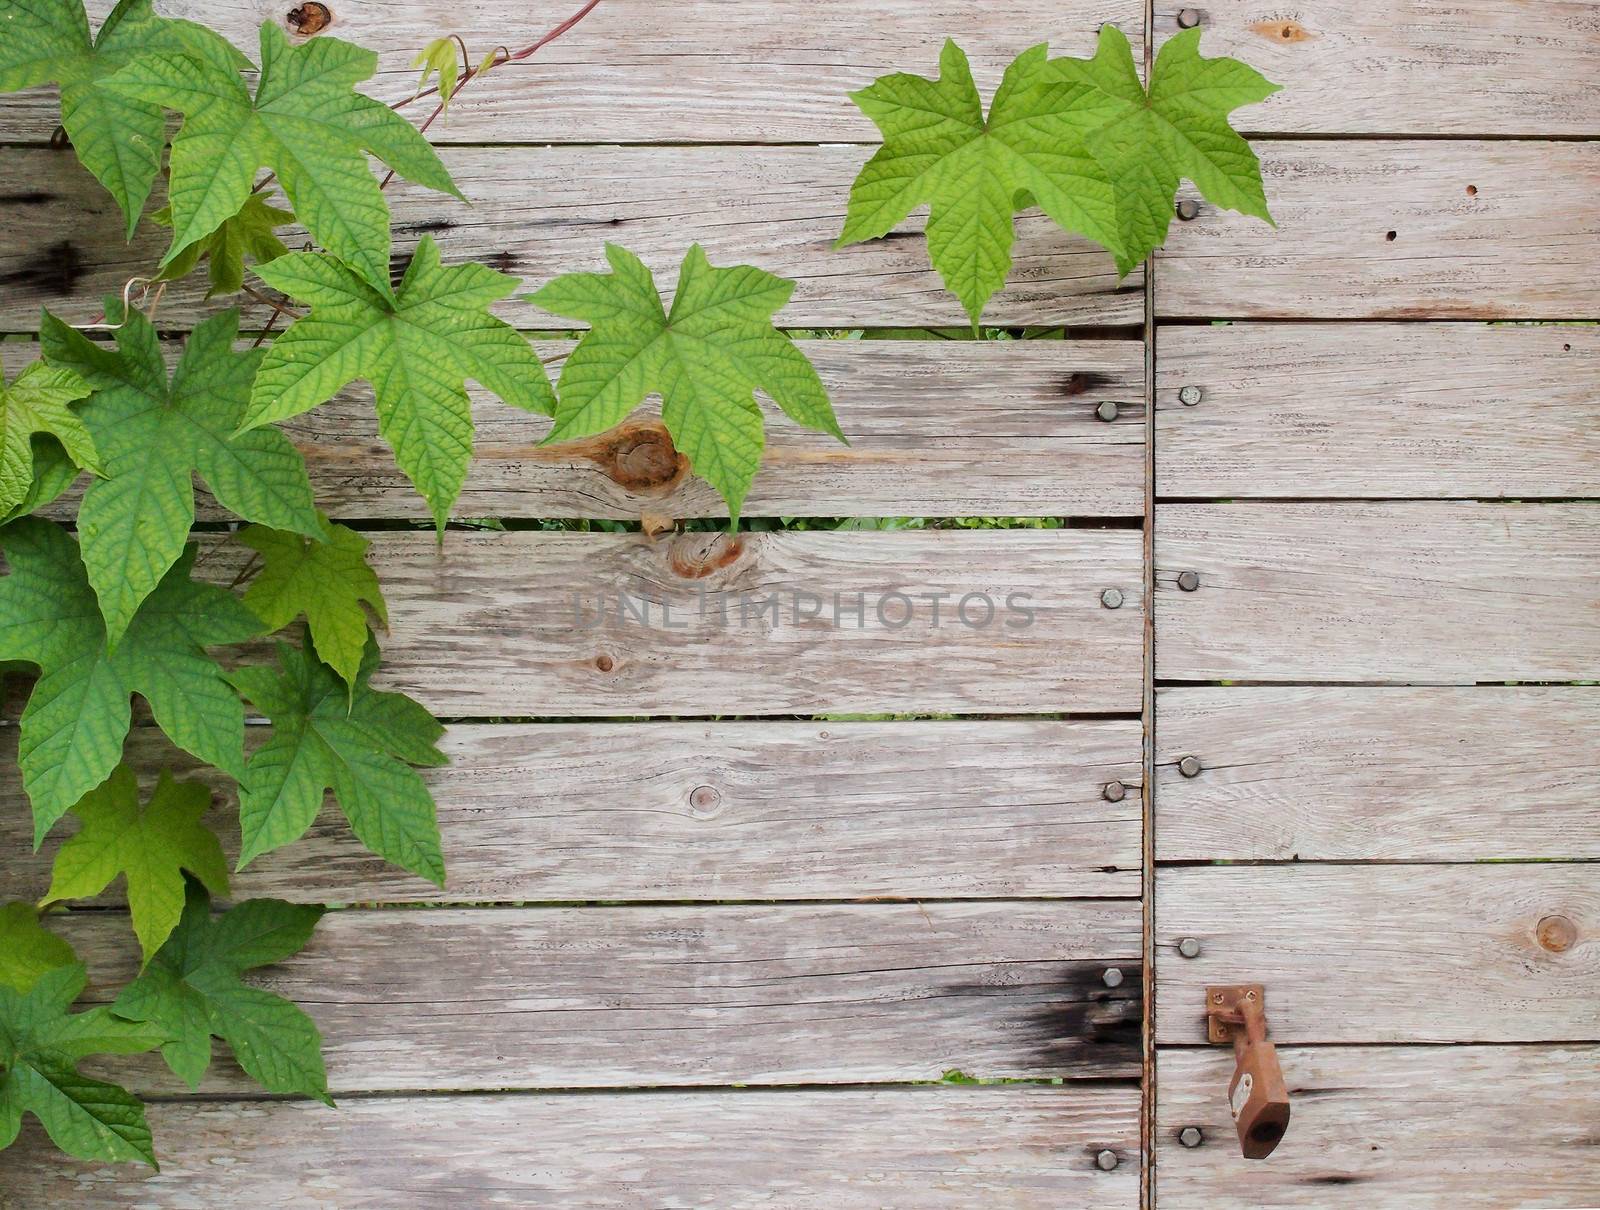 Background of old grunge wood texture with leaves